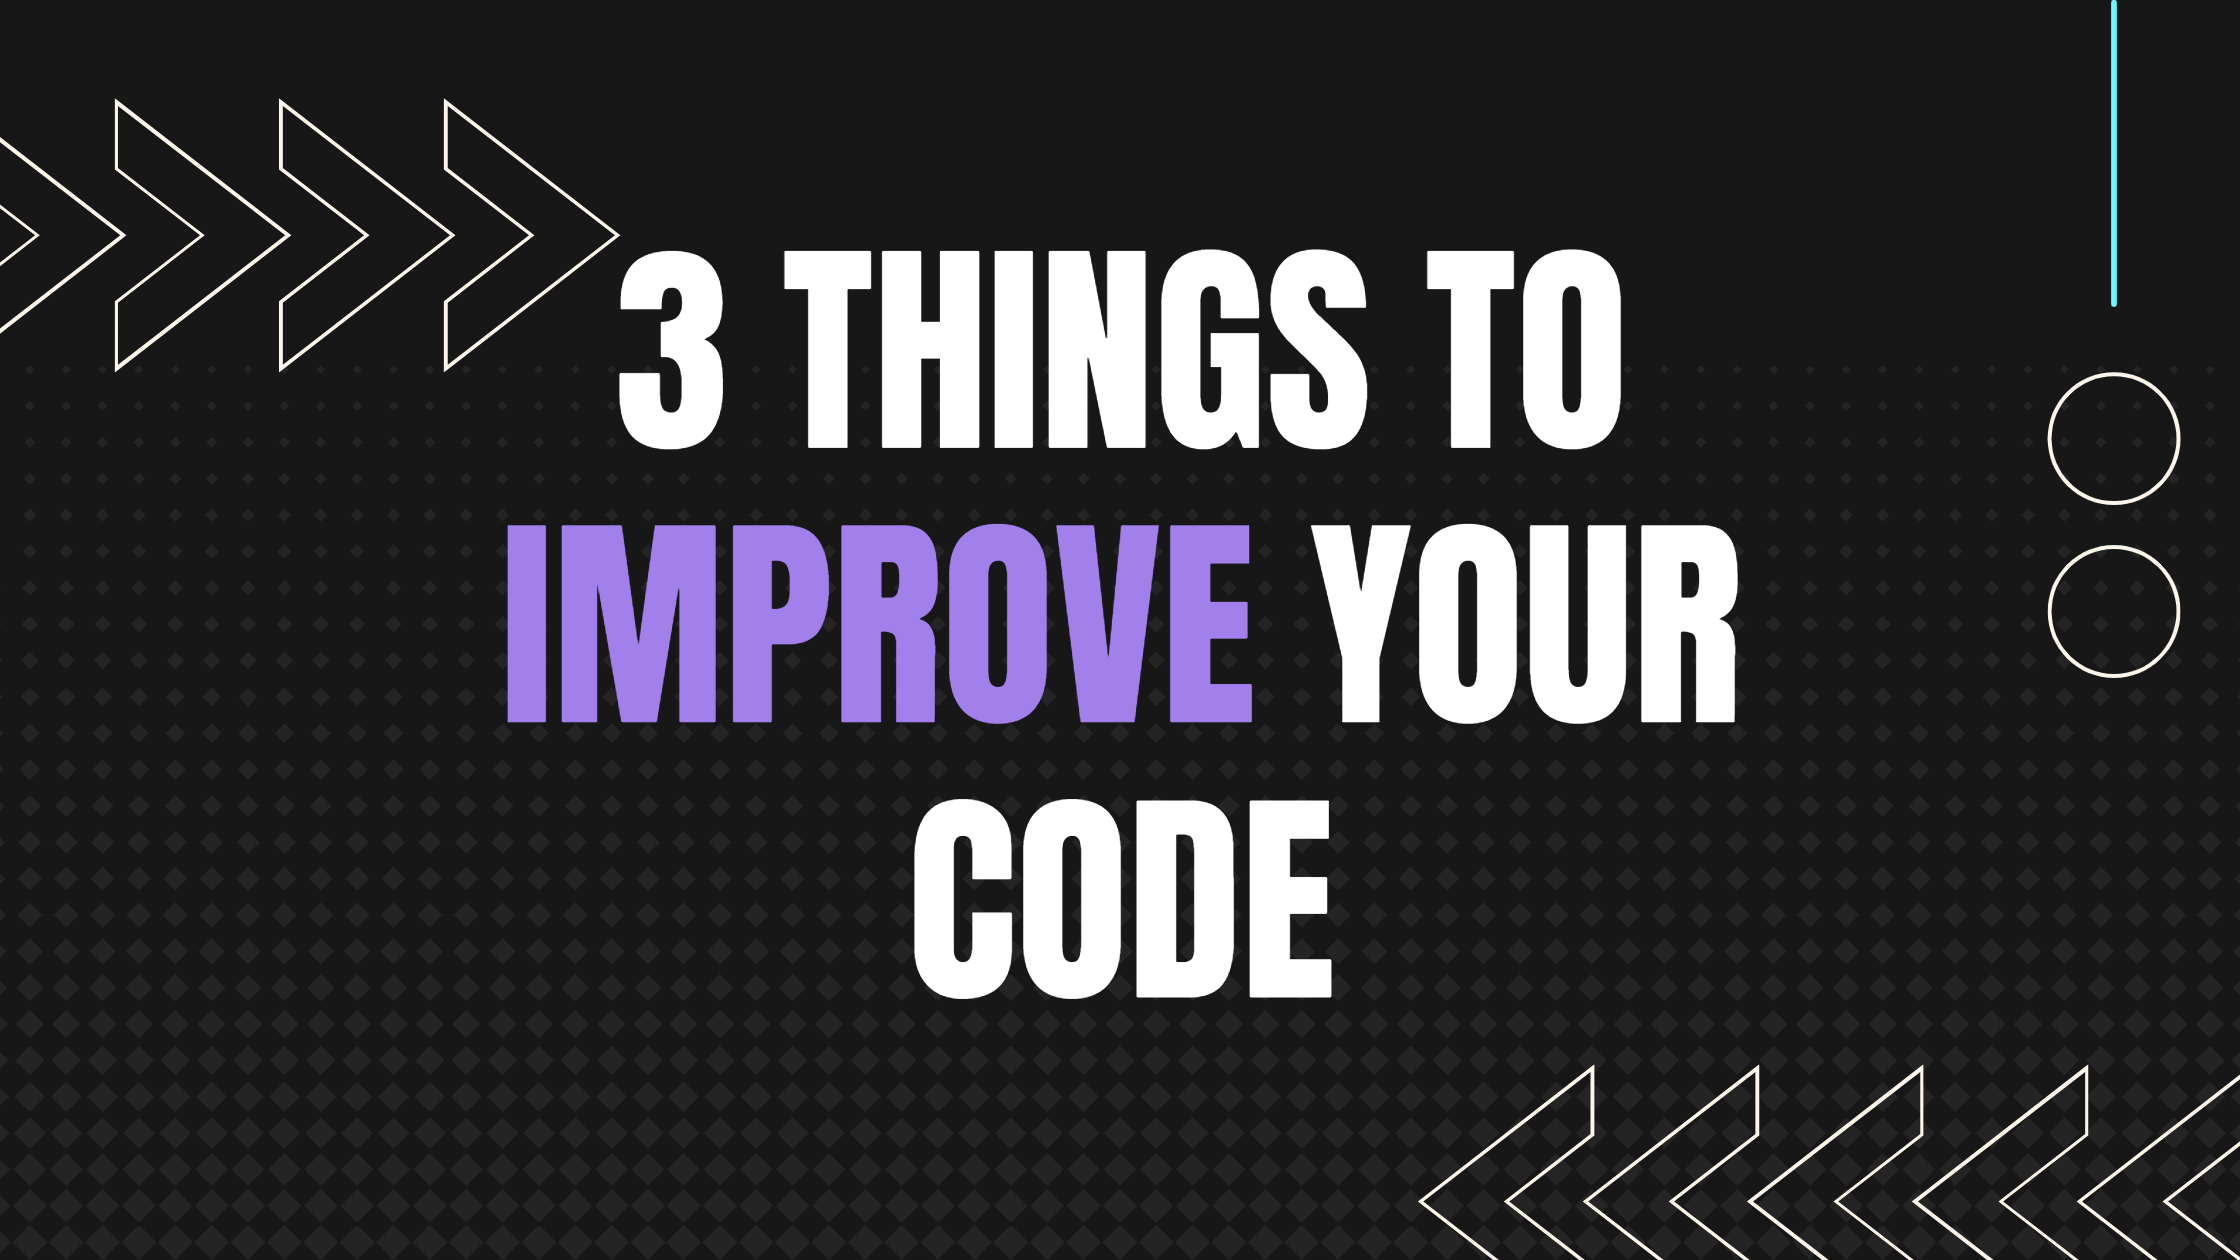 Do these 3 things to improve your code right now